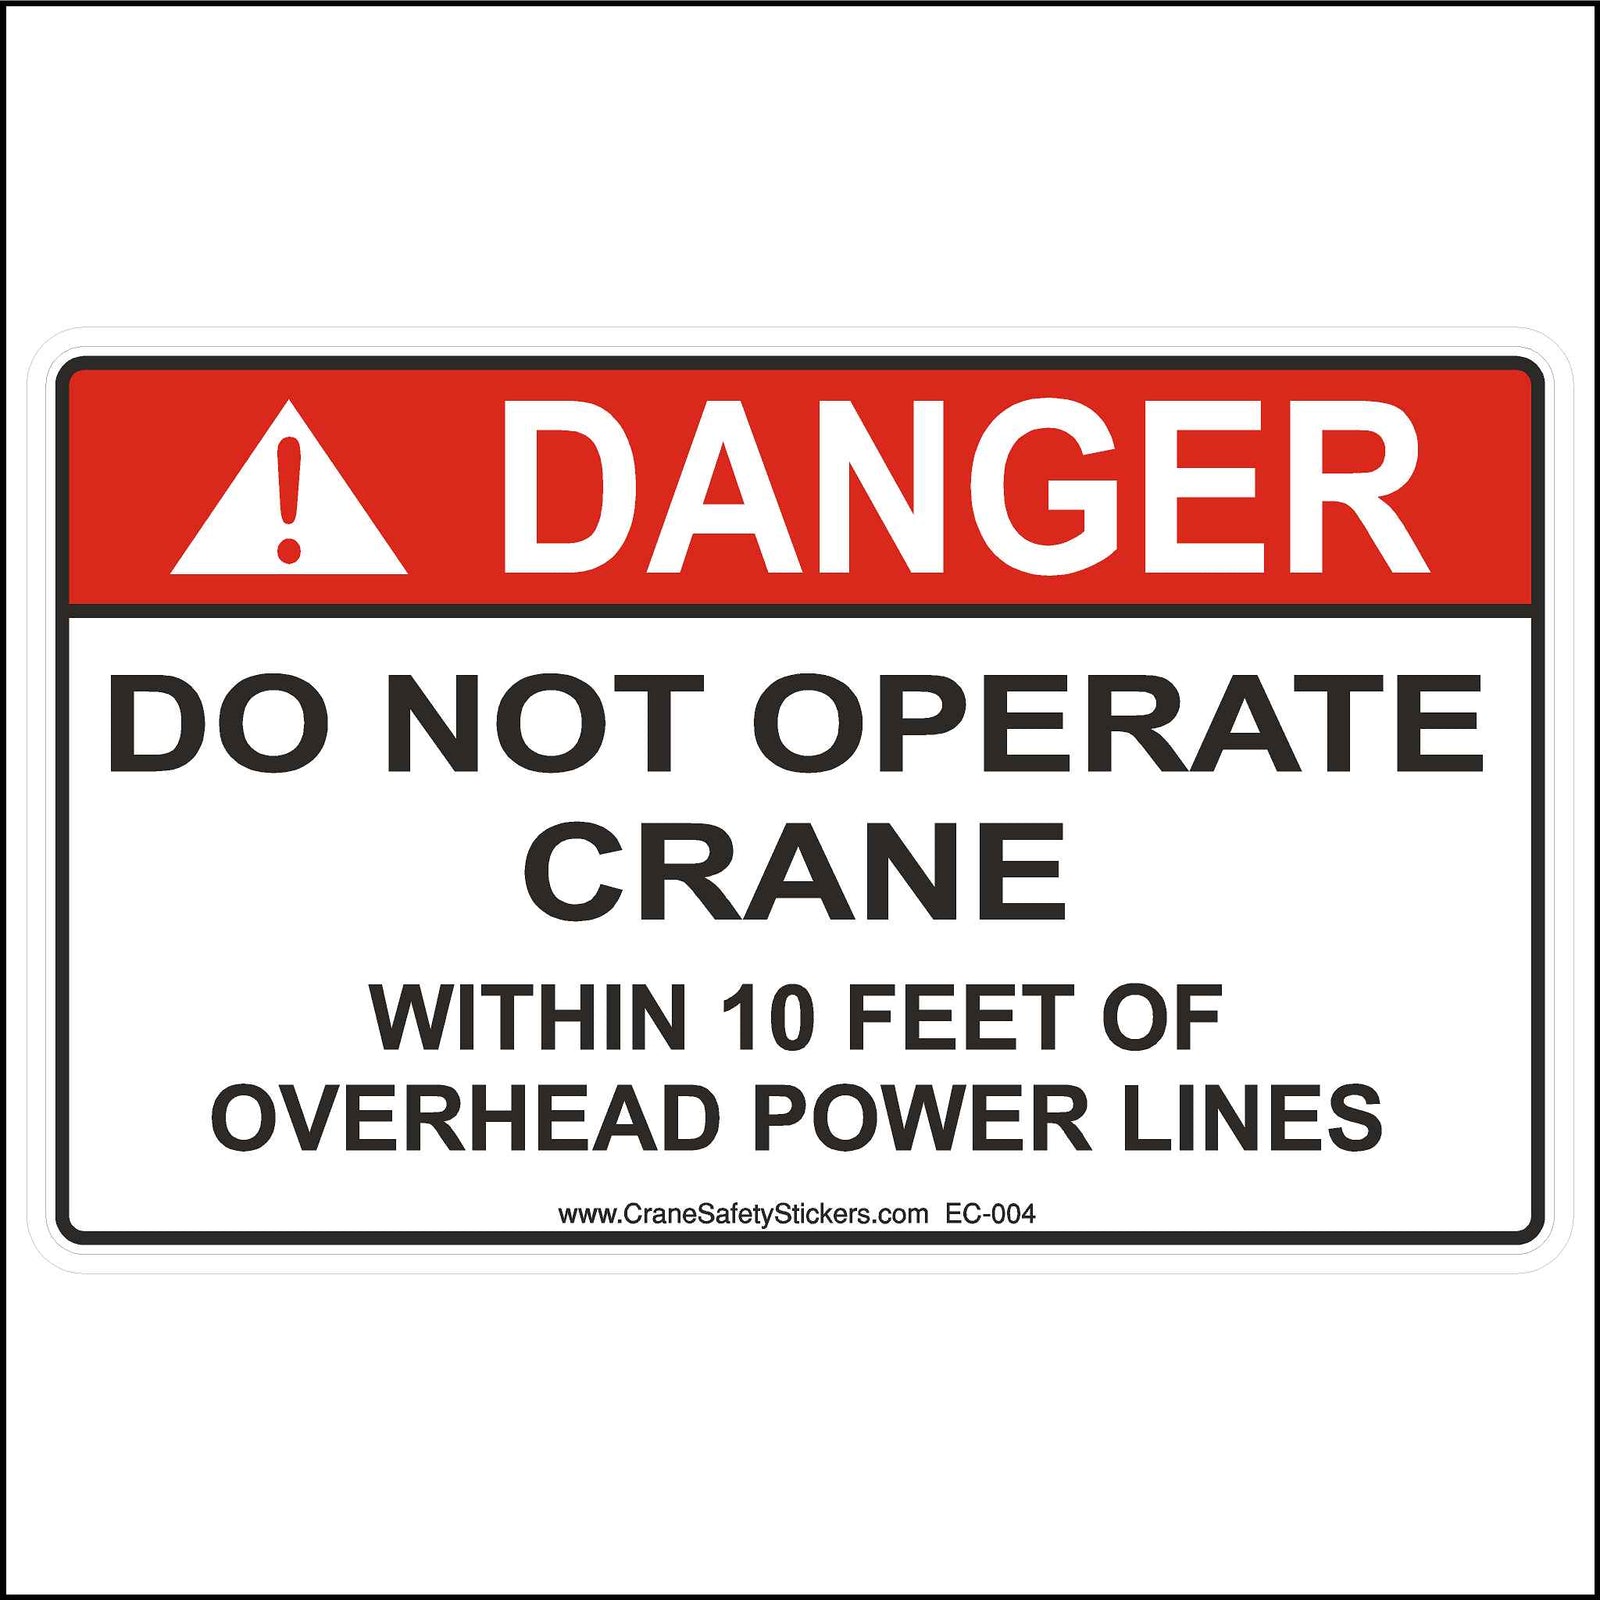 Best Selling Safety Stickers and Signs